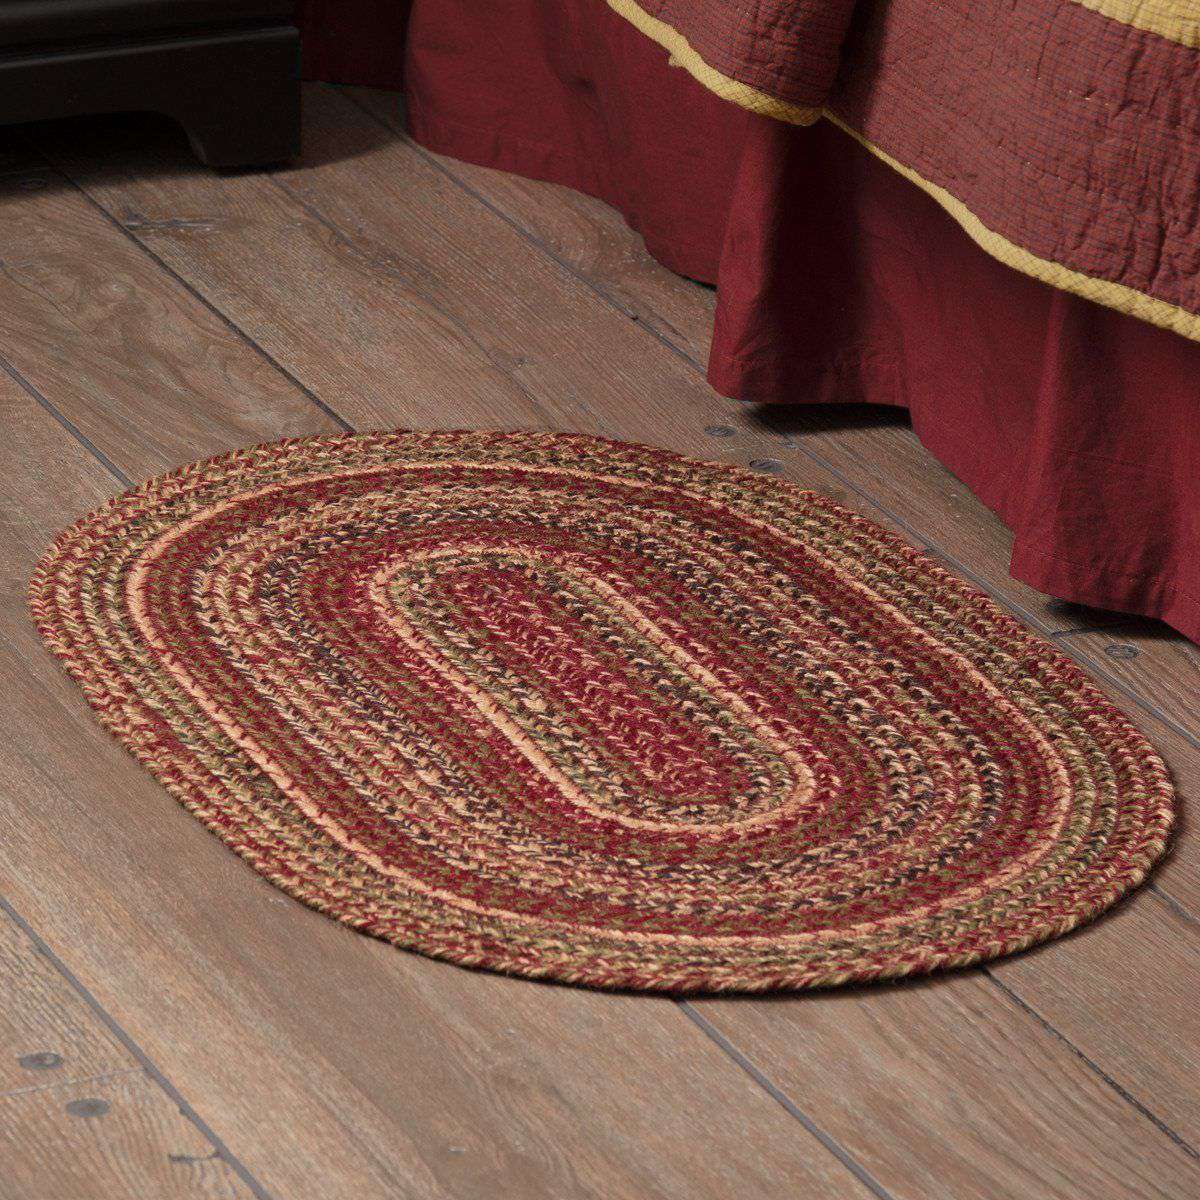 Cider Mill Jute Braided Rugs Oval VHC Brands Rugs VHC Brands 20" x 30" 